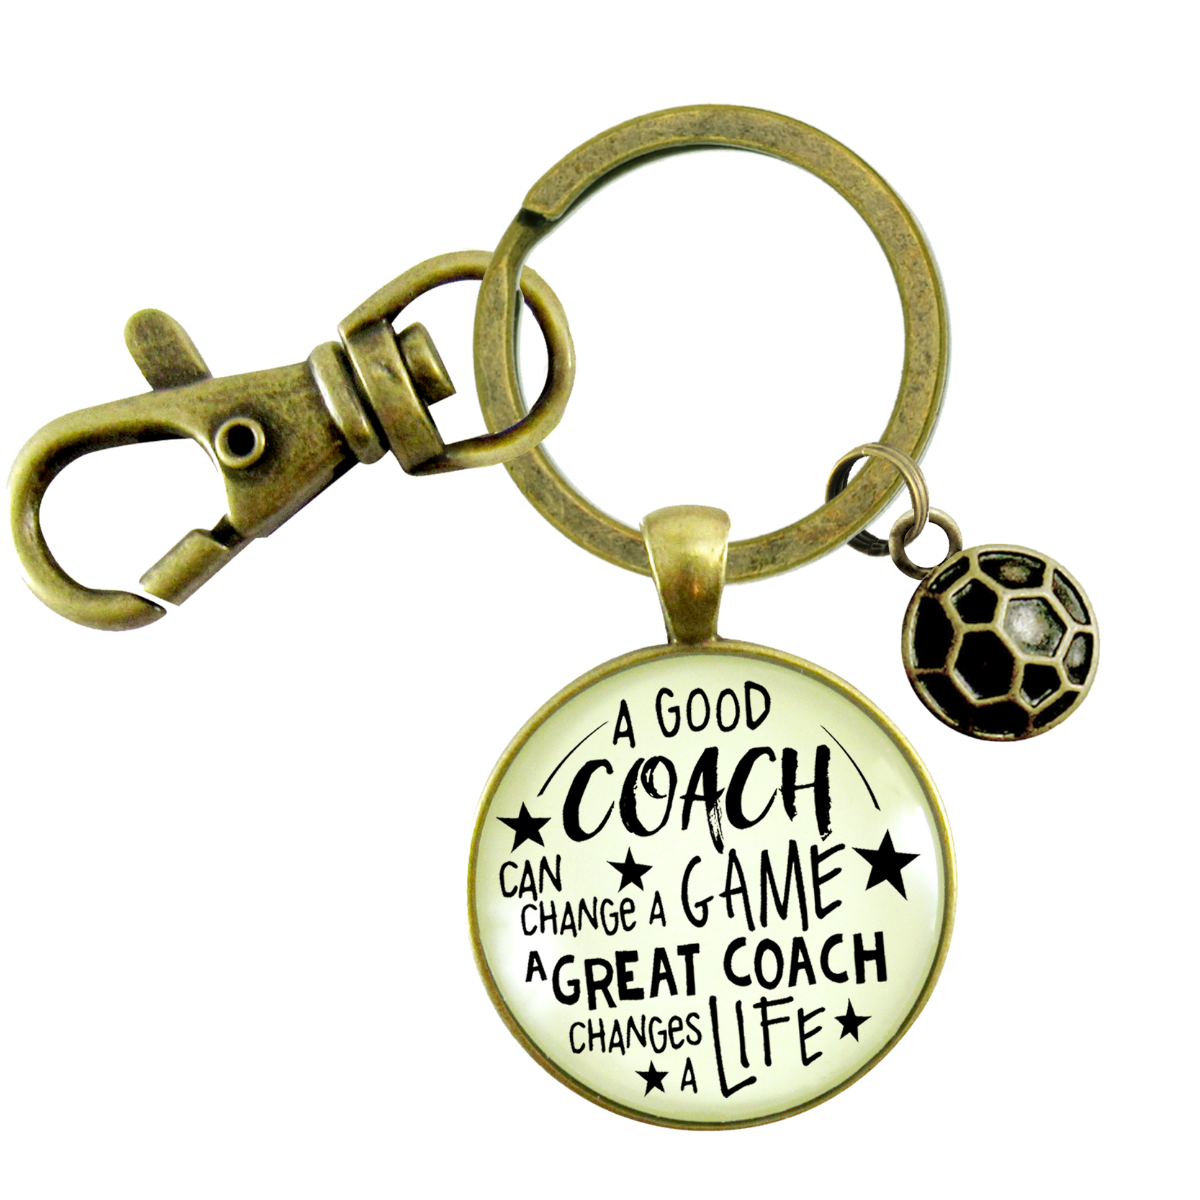 Soccer Coaching Sport Keychain Great Coach Changes Life Thank You Gift - Gutsy Goodness Handmade Jewelry;Soccer Coaching Sport Keychain Great Coach Changes Life Thank You Gift - Gutsy Goodness Handmade Jewelry Gifts